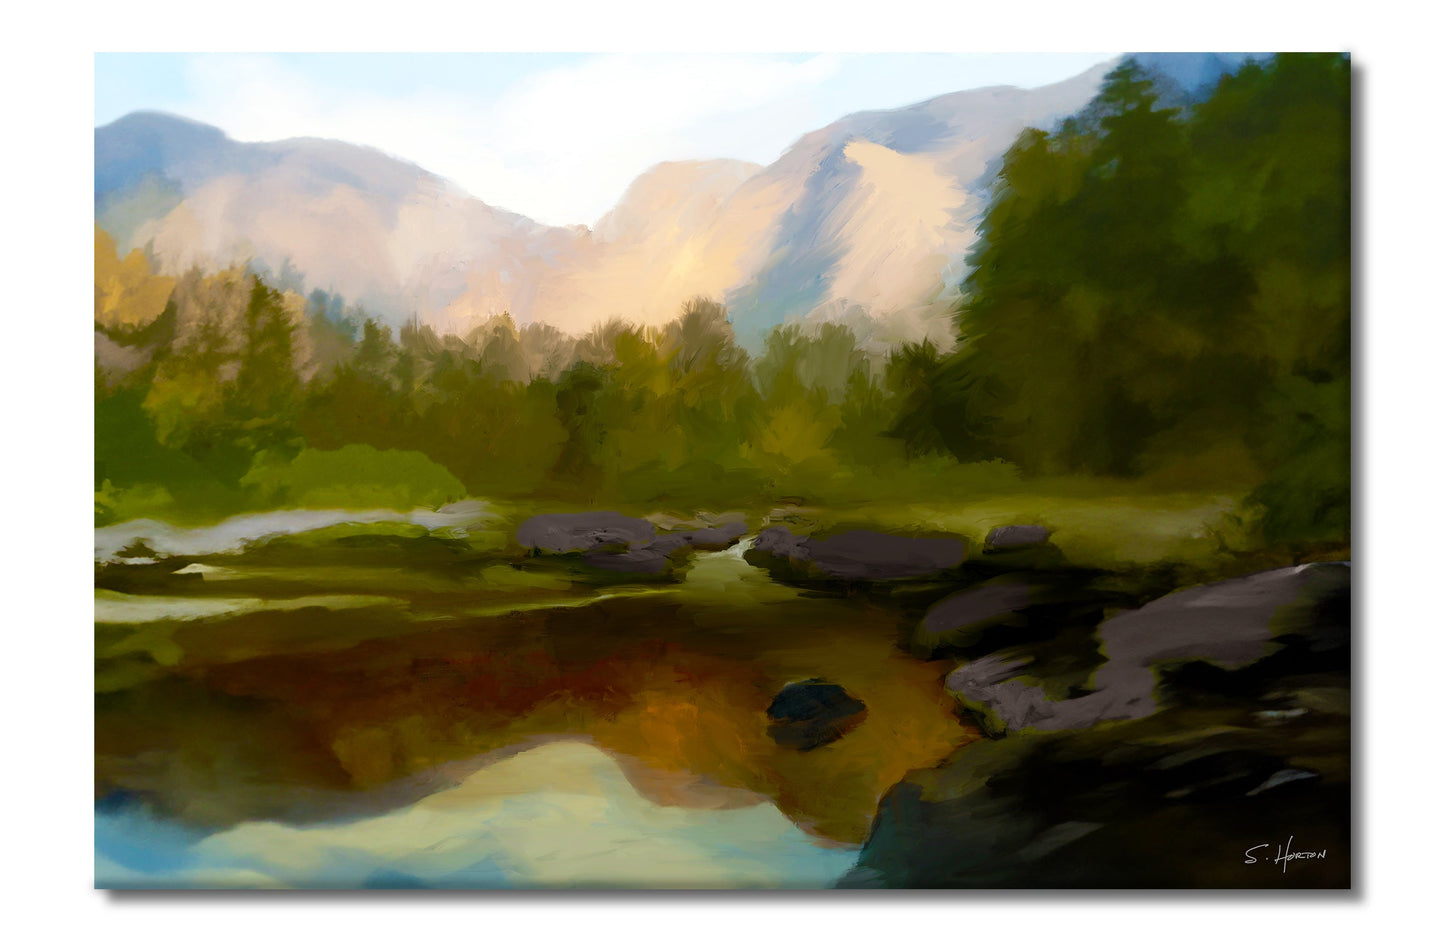 Still Mountain Waters, Digital Art, Giclee on Canvas with Signature, High Quality Image, 24"x36" or 40"x60", Limited Edition of 50